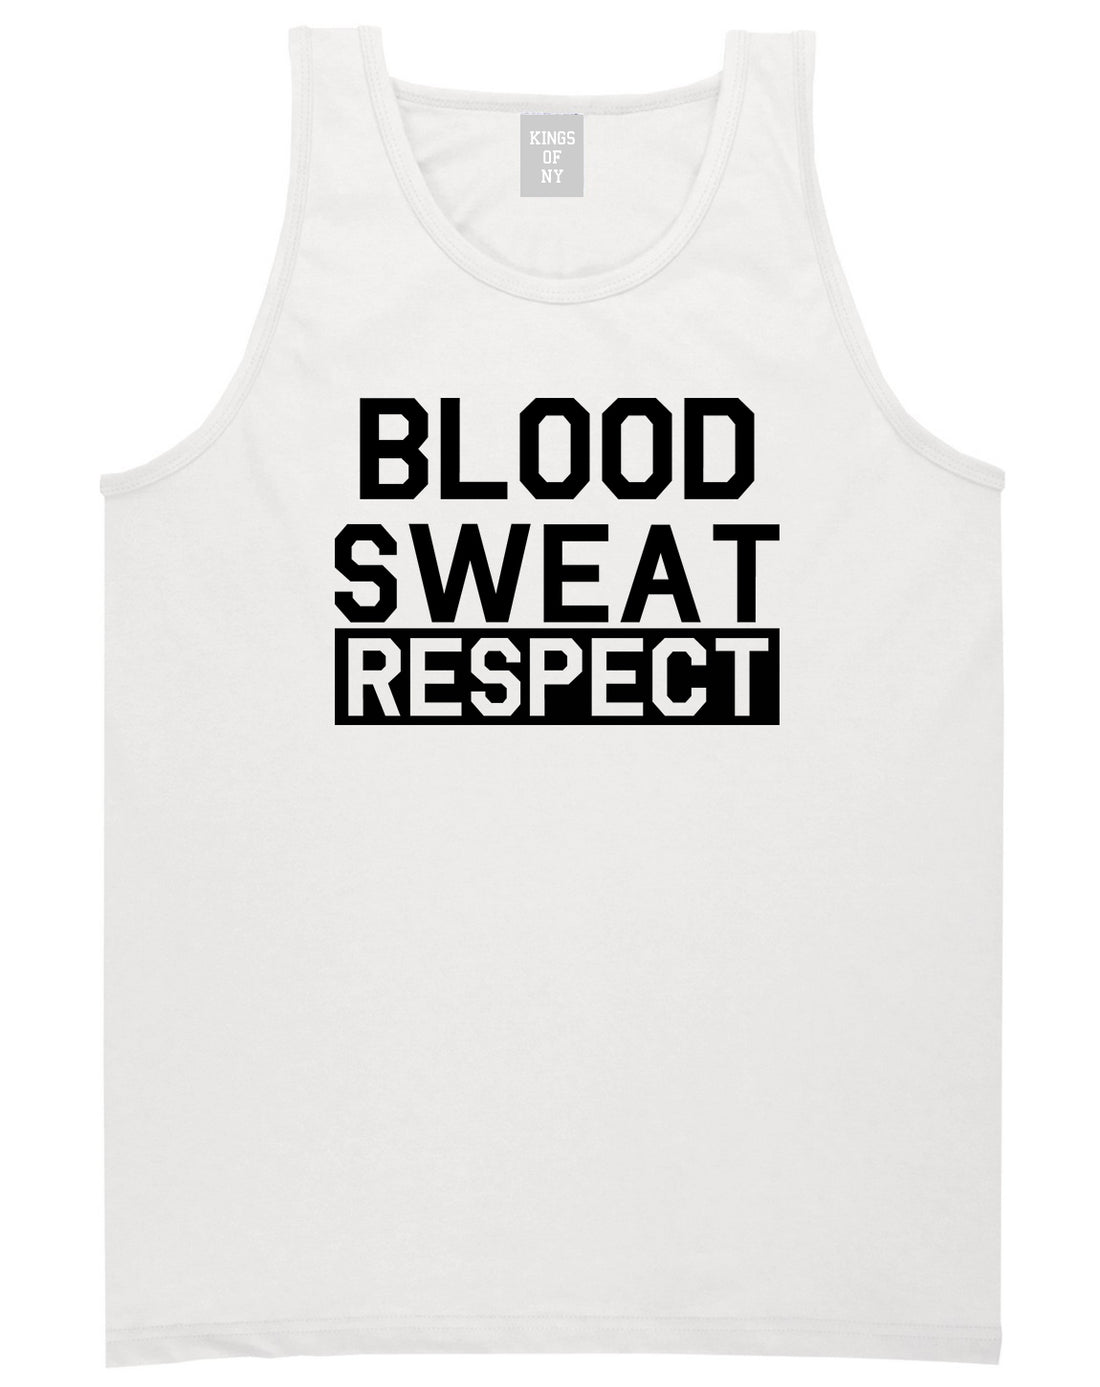 Blood Sweat Respect Gym Workout Mens Tank Top Shirt White by Kings Of NY